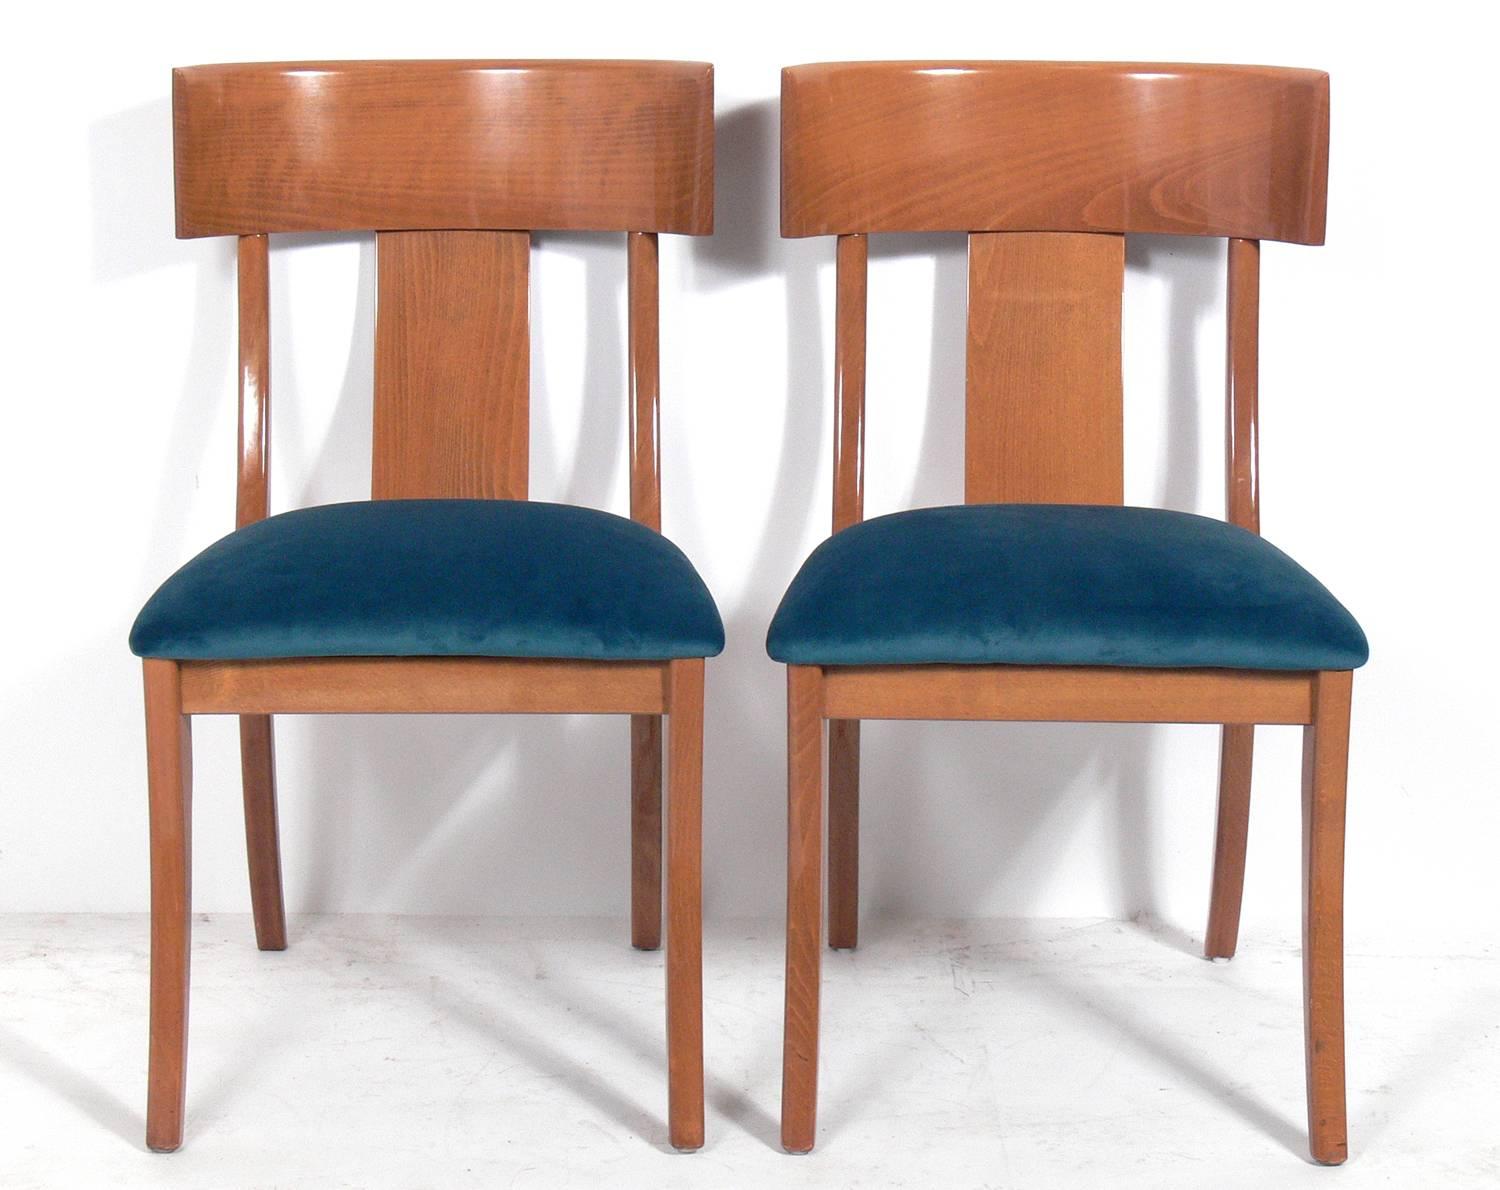 Set of four elegant klismos dining chairs in the manner of T. H. Robsjohn-Gibbings, circa 1980s. They have been recently reupholstered in an emerald green velvety suede fabric.